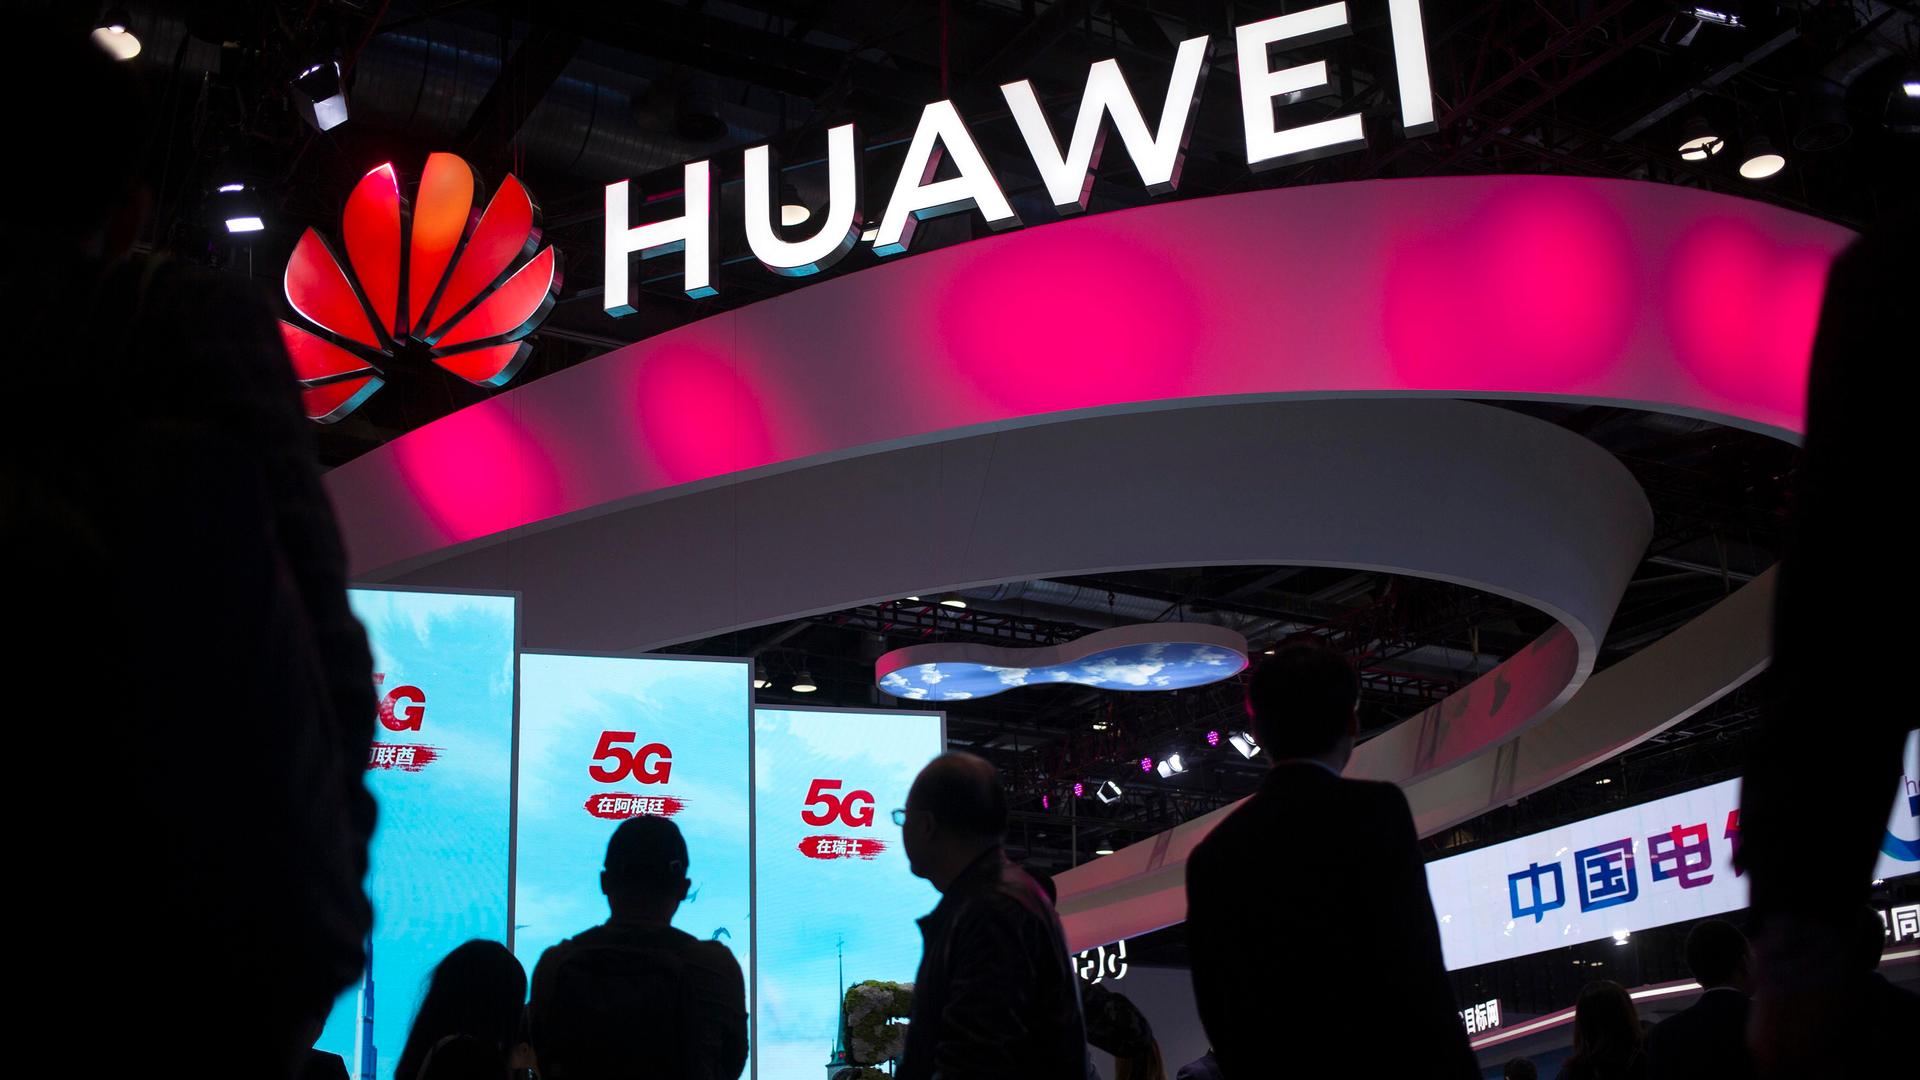 In this Oct. 31, 2019, file photo, attendees walk past a display for 5G services from Chinese technology firm Huawei at the PT Expo in Beijing.